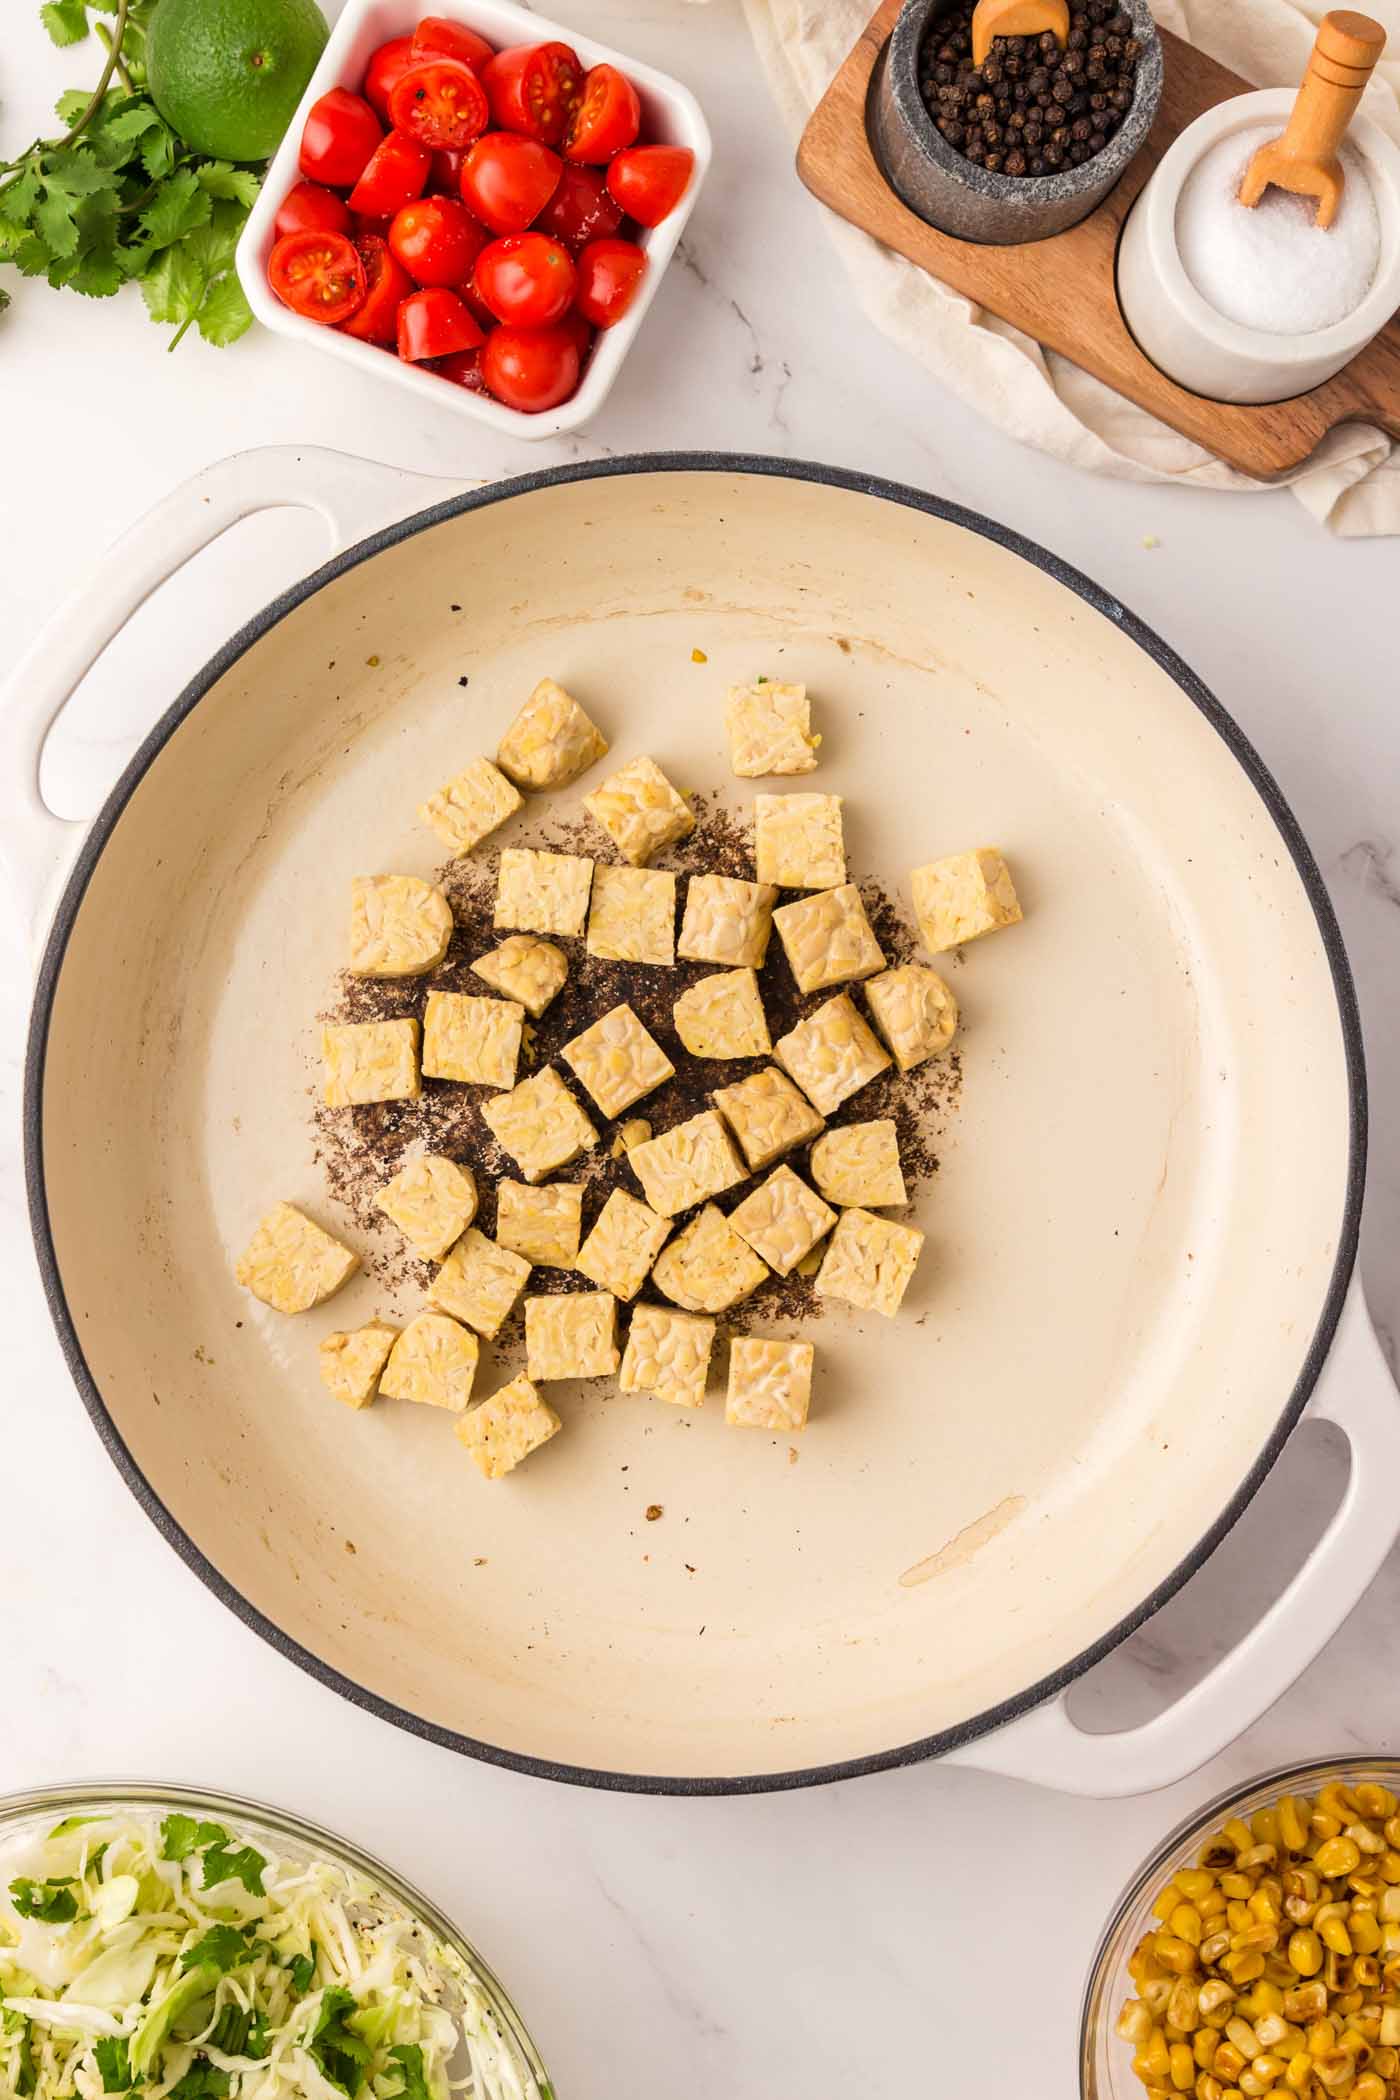 Cubes of tempeh cooking in a pan.